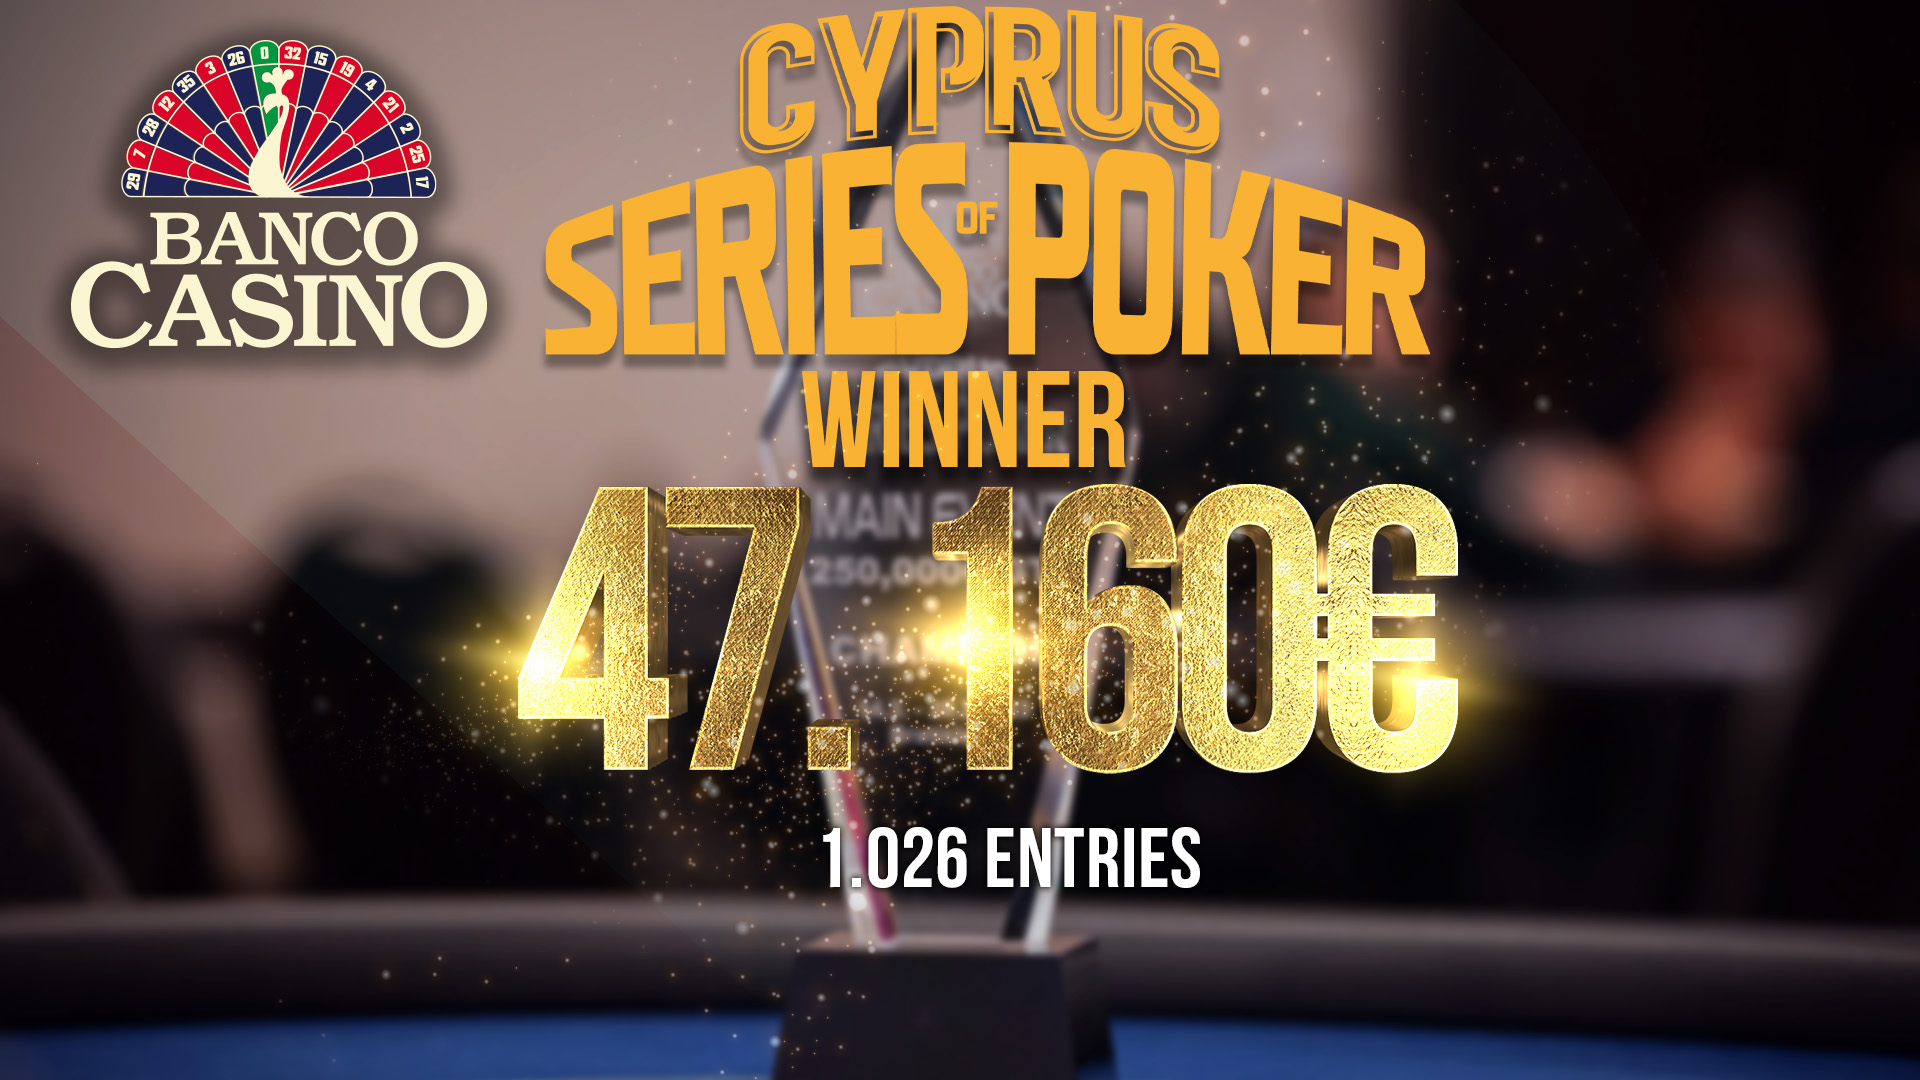 CSOP MAIN EVENT AT BANCO CASINO IS LOOKING FOR A CHAMPION THAT WILL TAKE 47,160€!